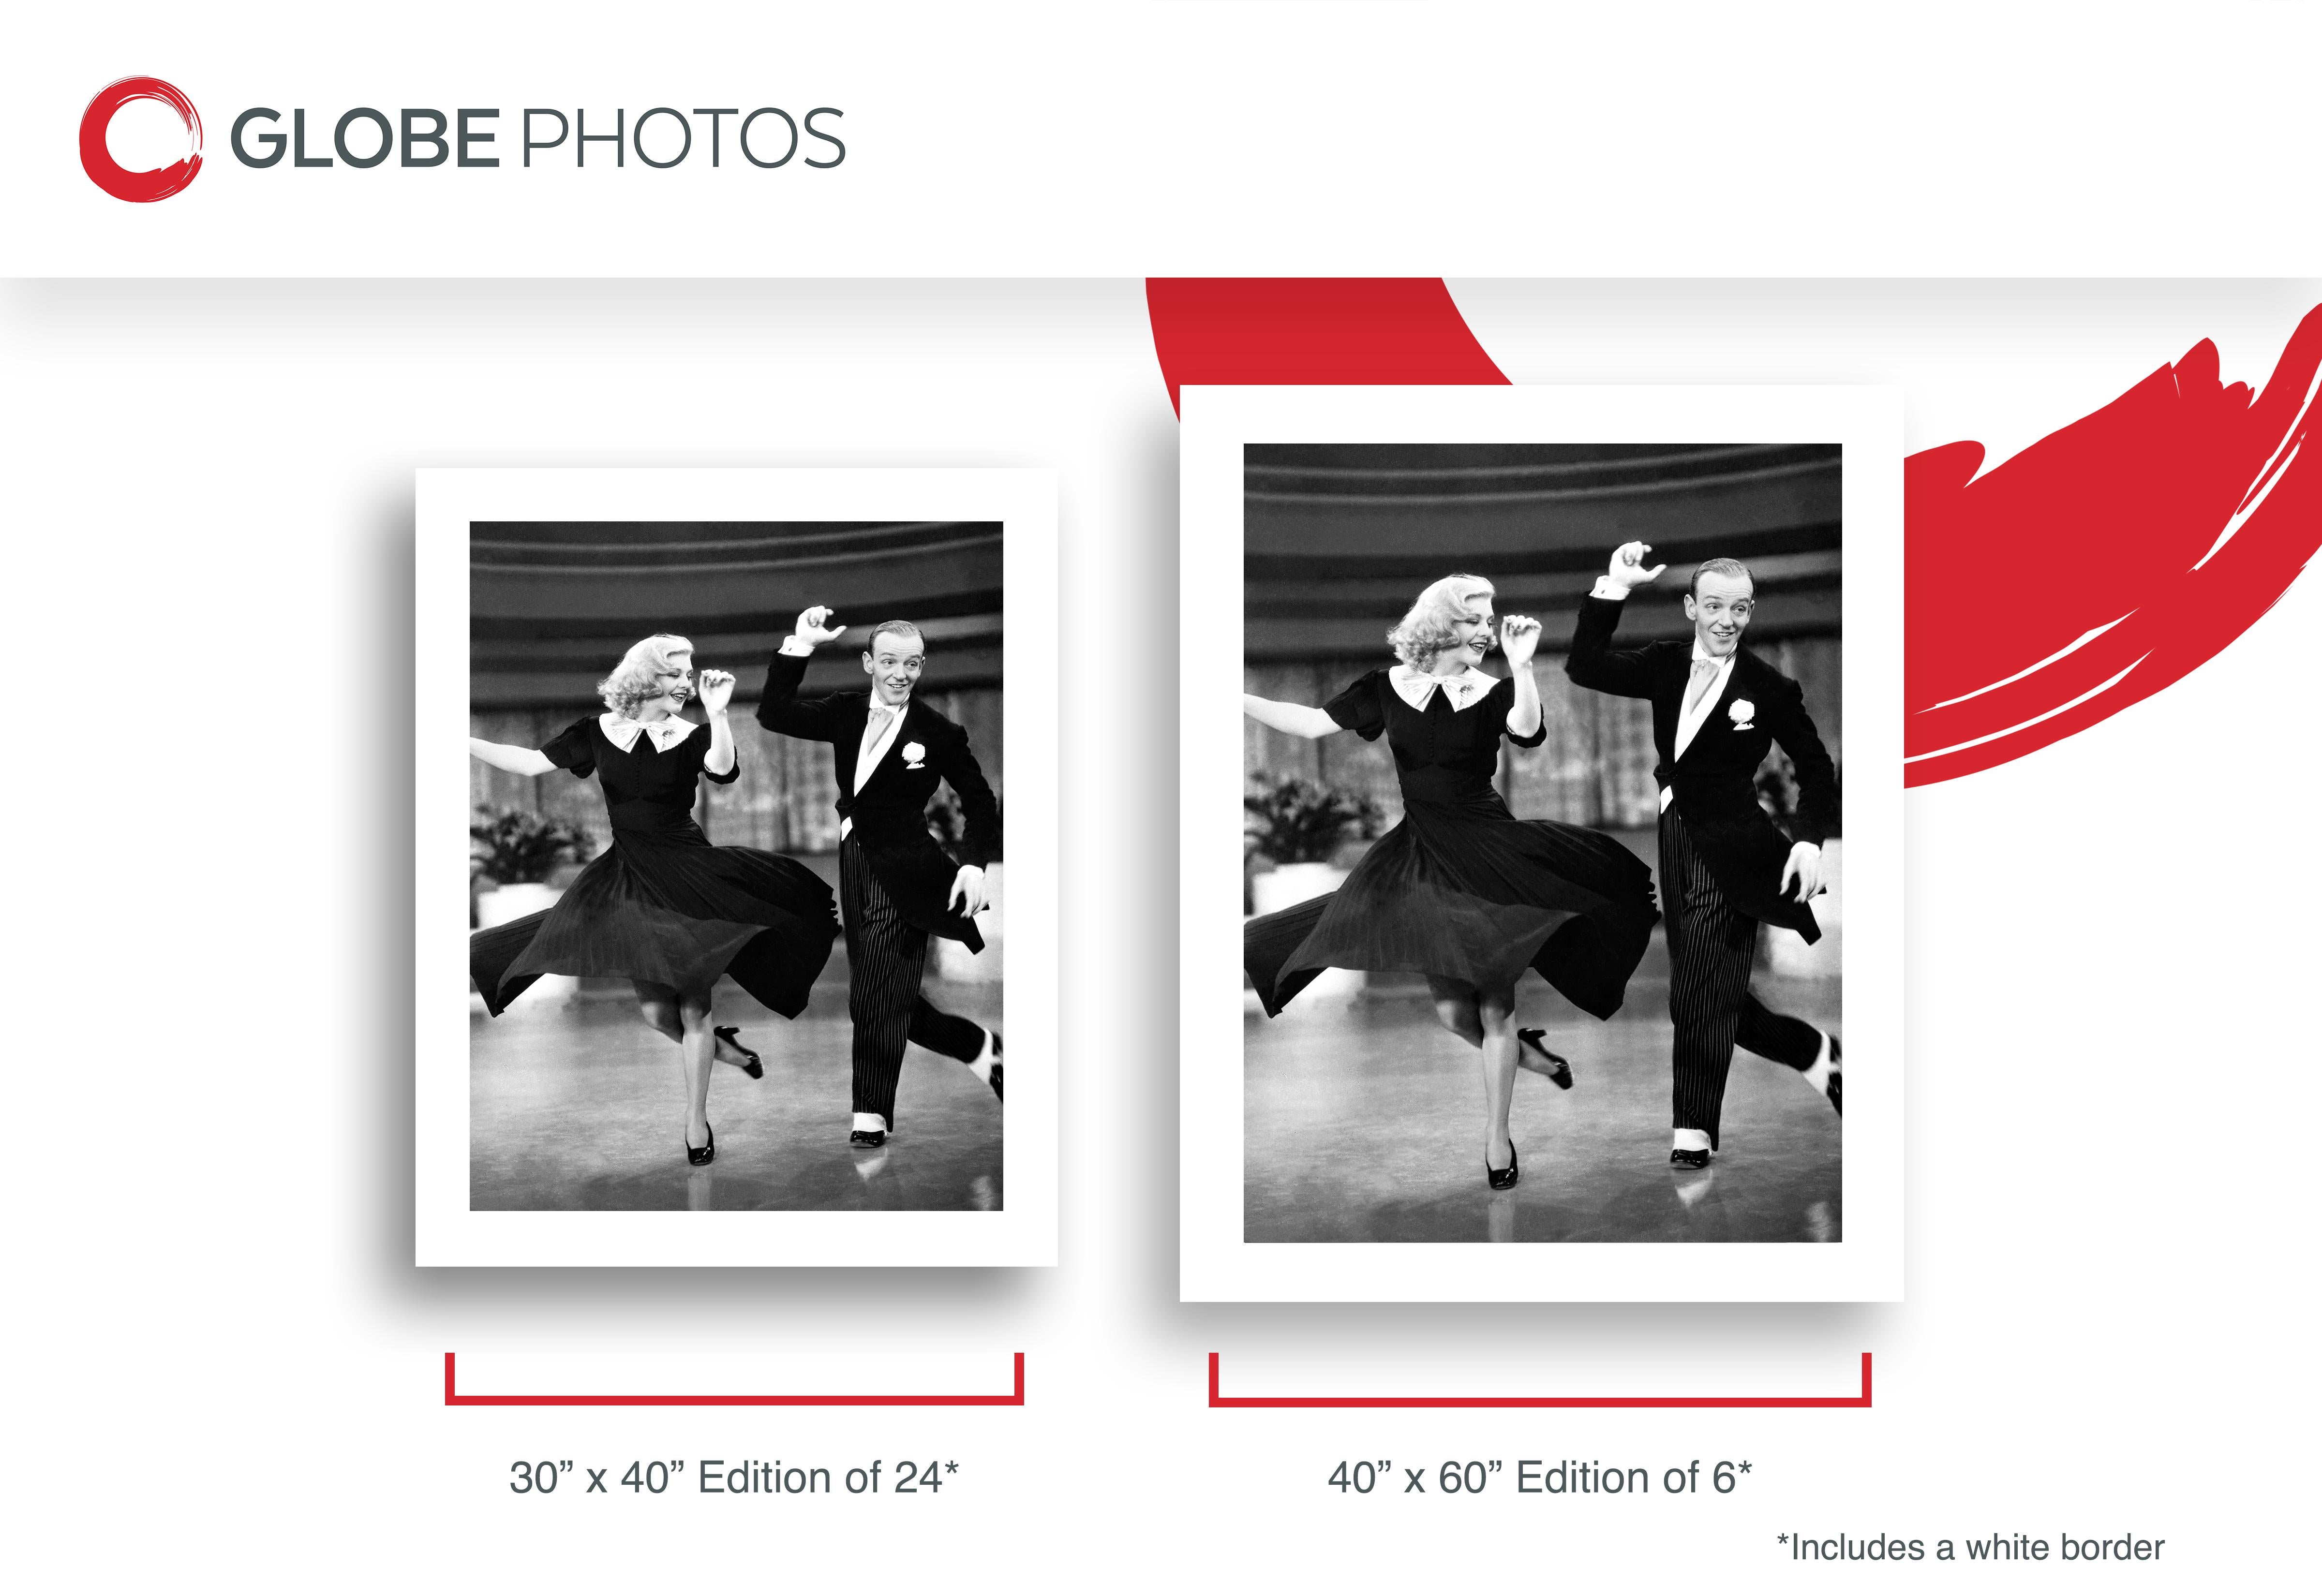 This black and white action shot features Ginger Rogers and Fred Astaire dancing for their roles in 